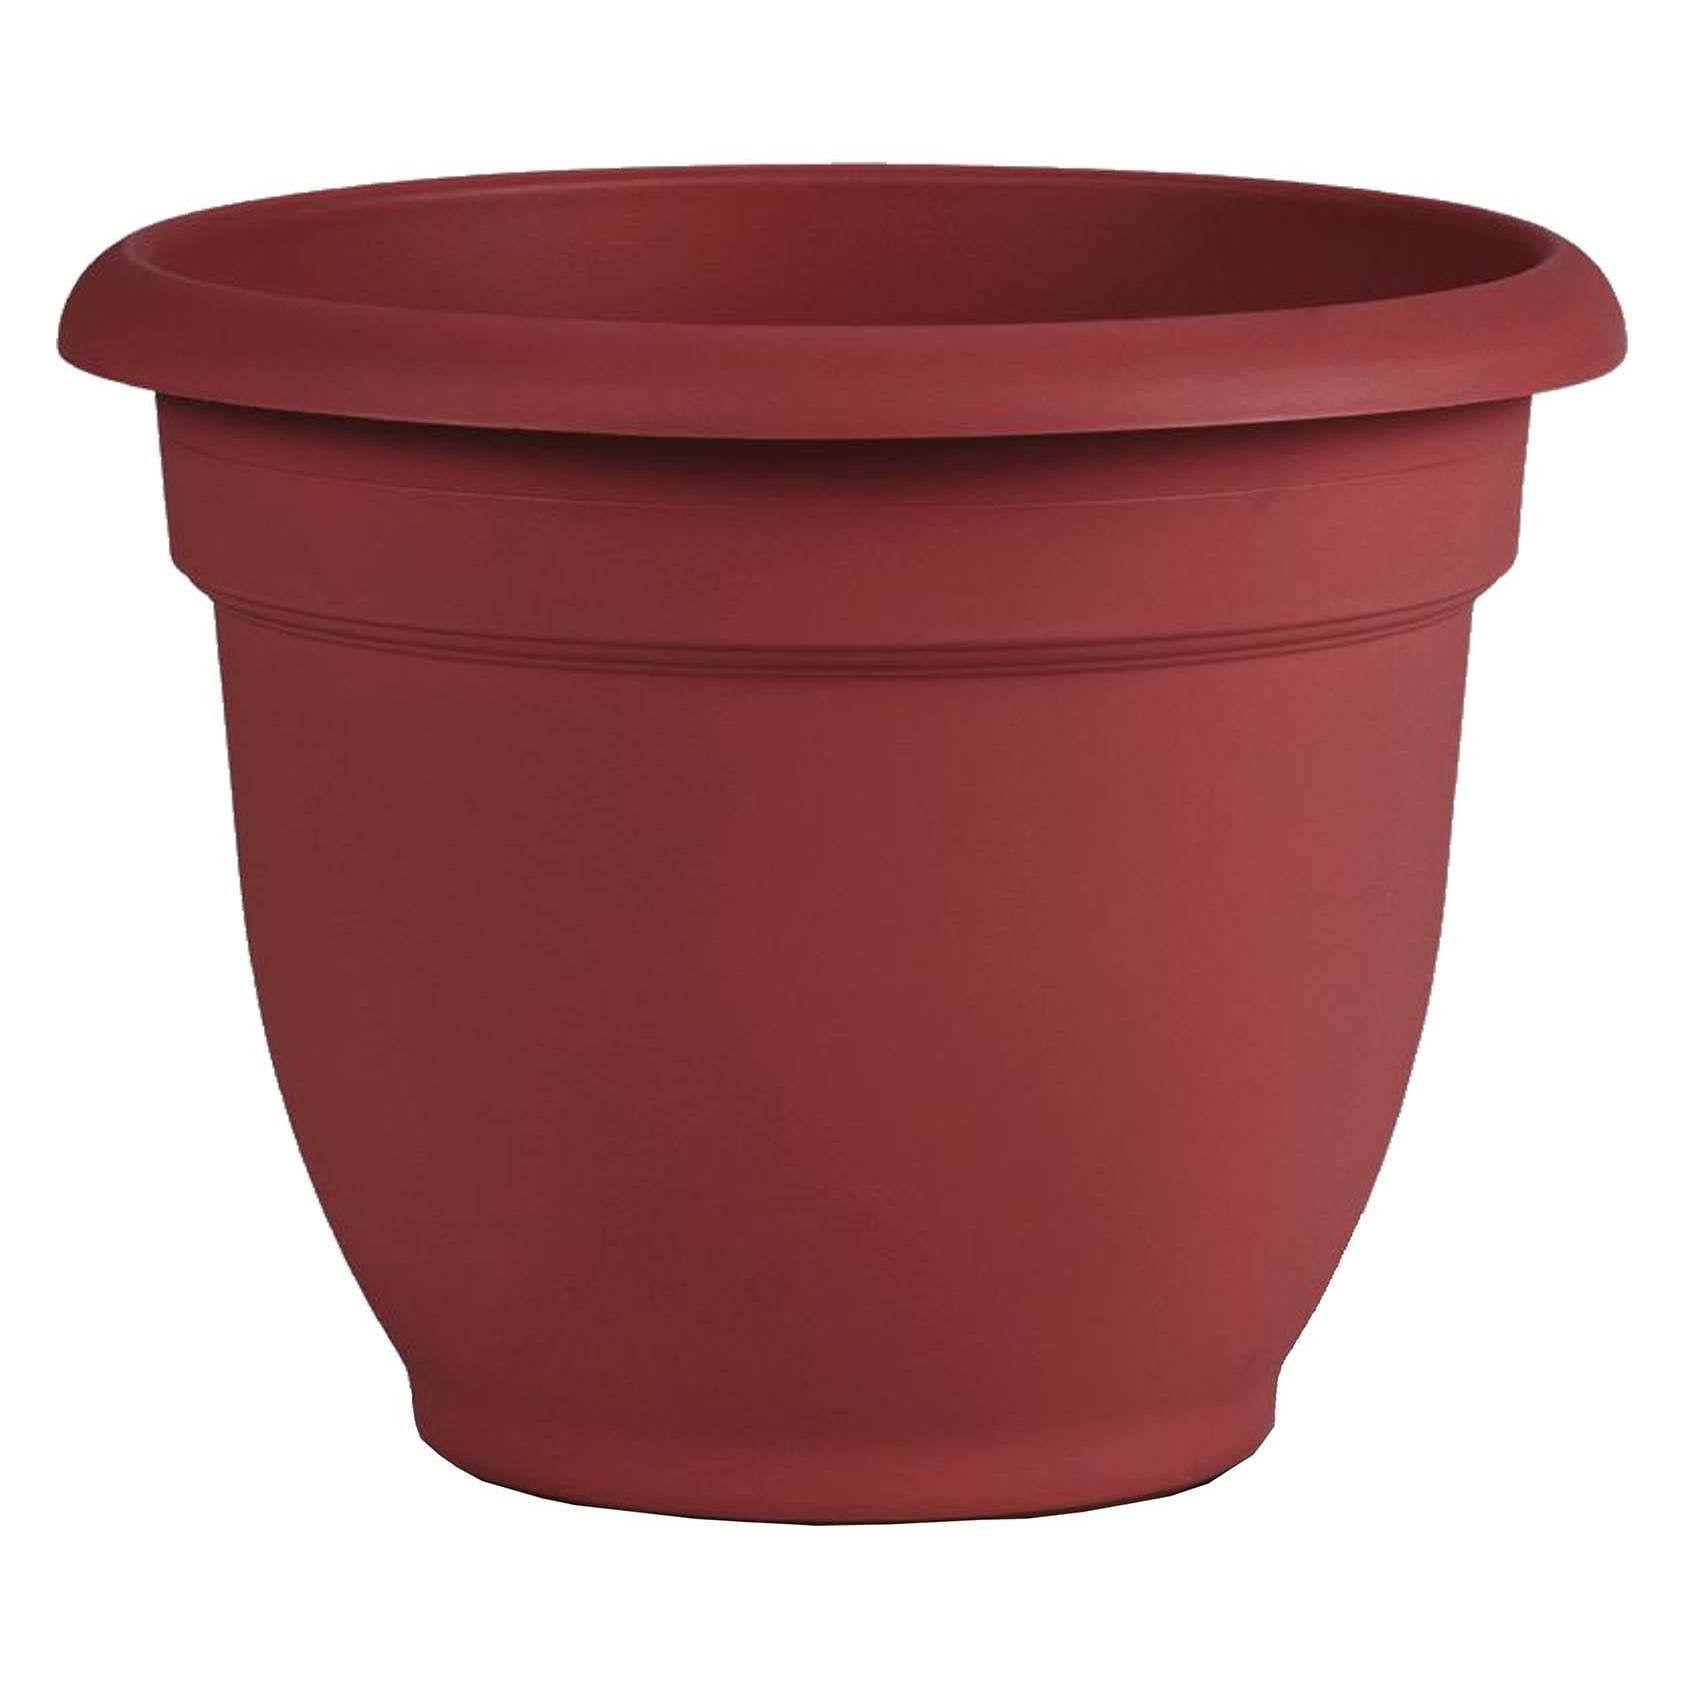 Bloem Planter, Ariana Burnt Red, 12 Inches